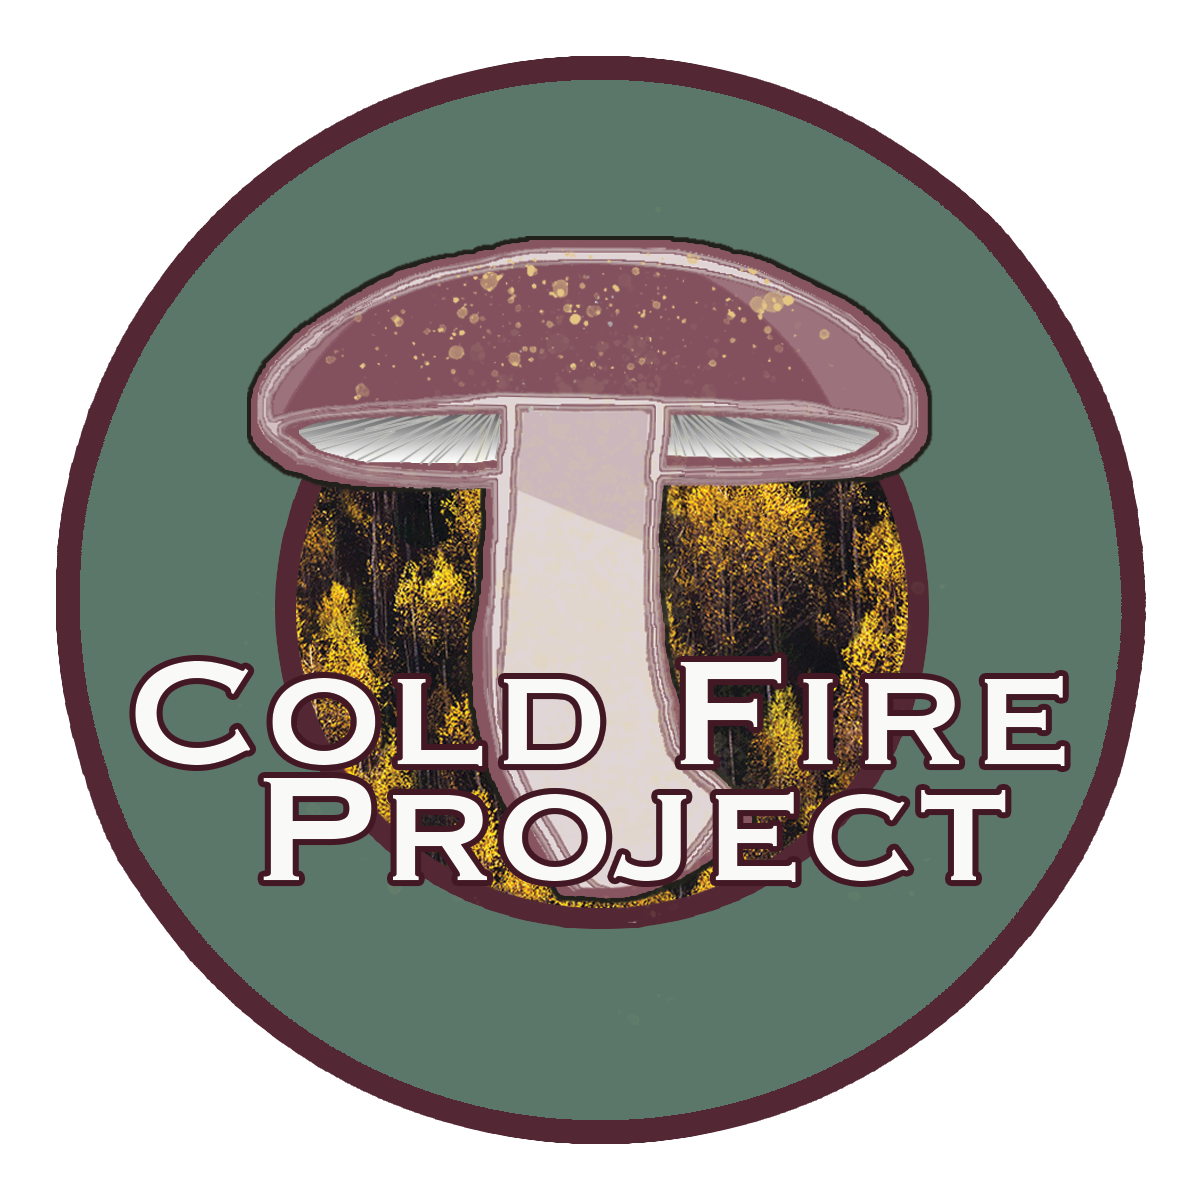 The Coldfire Project